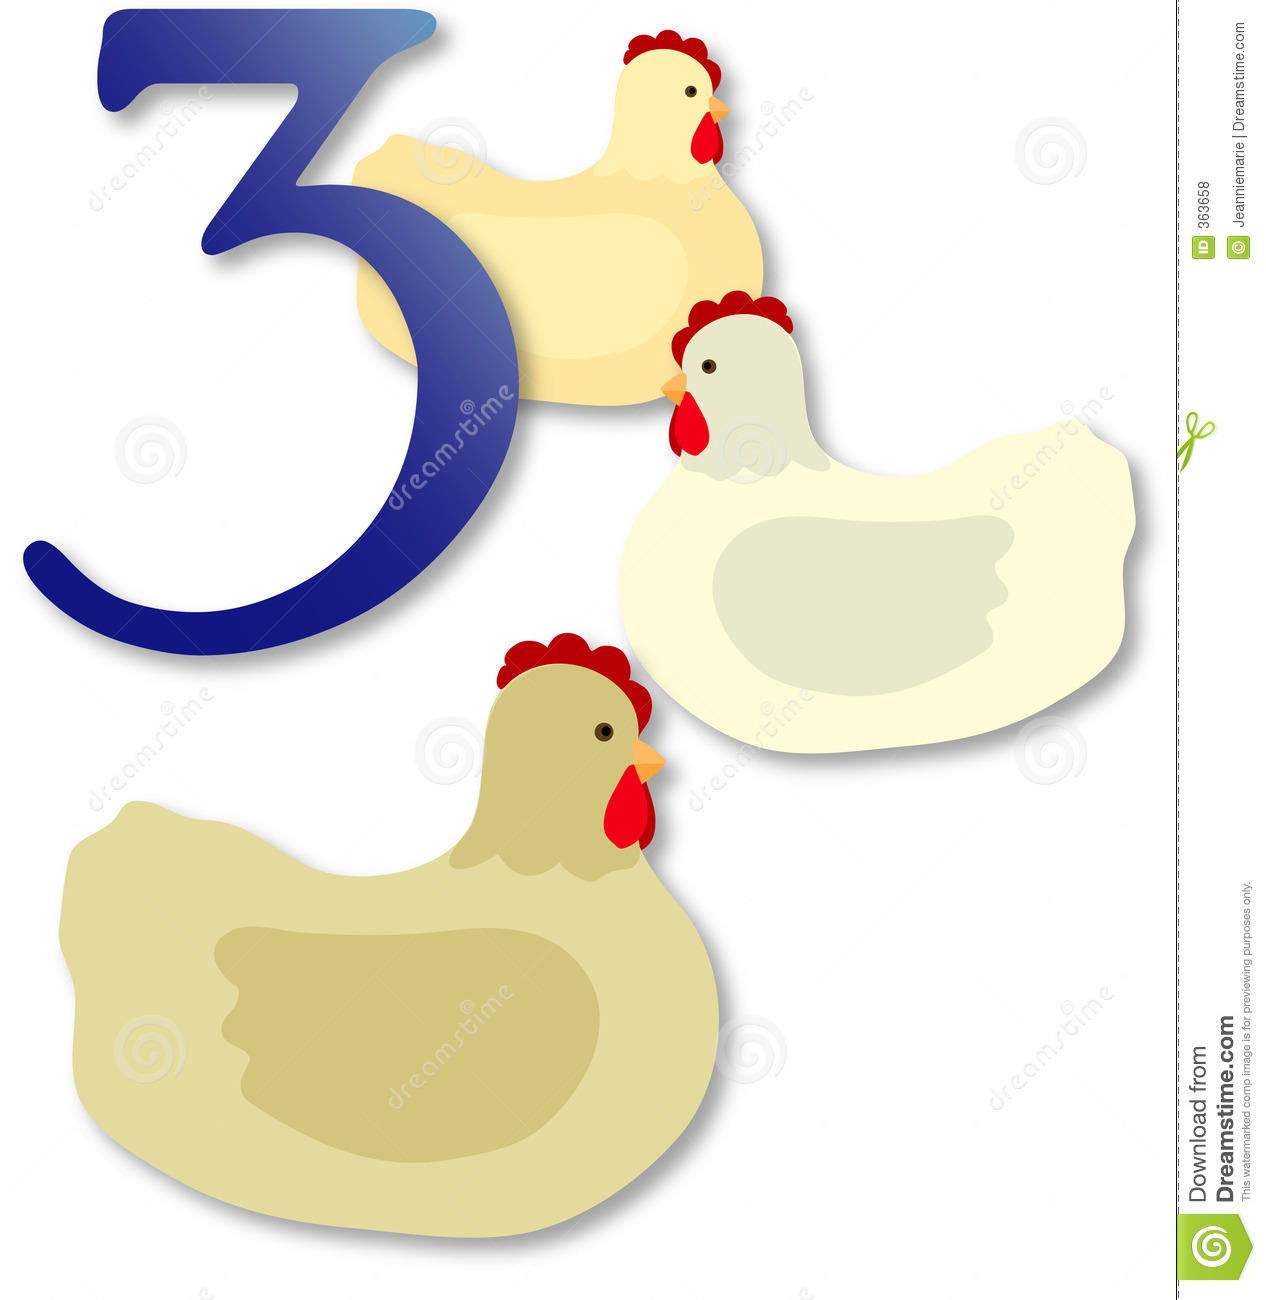 12 Days Of Christmas  3 French Hens Royalty Free Stock Photos   Image